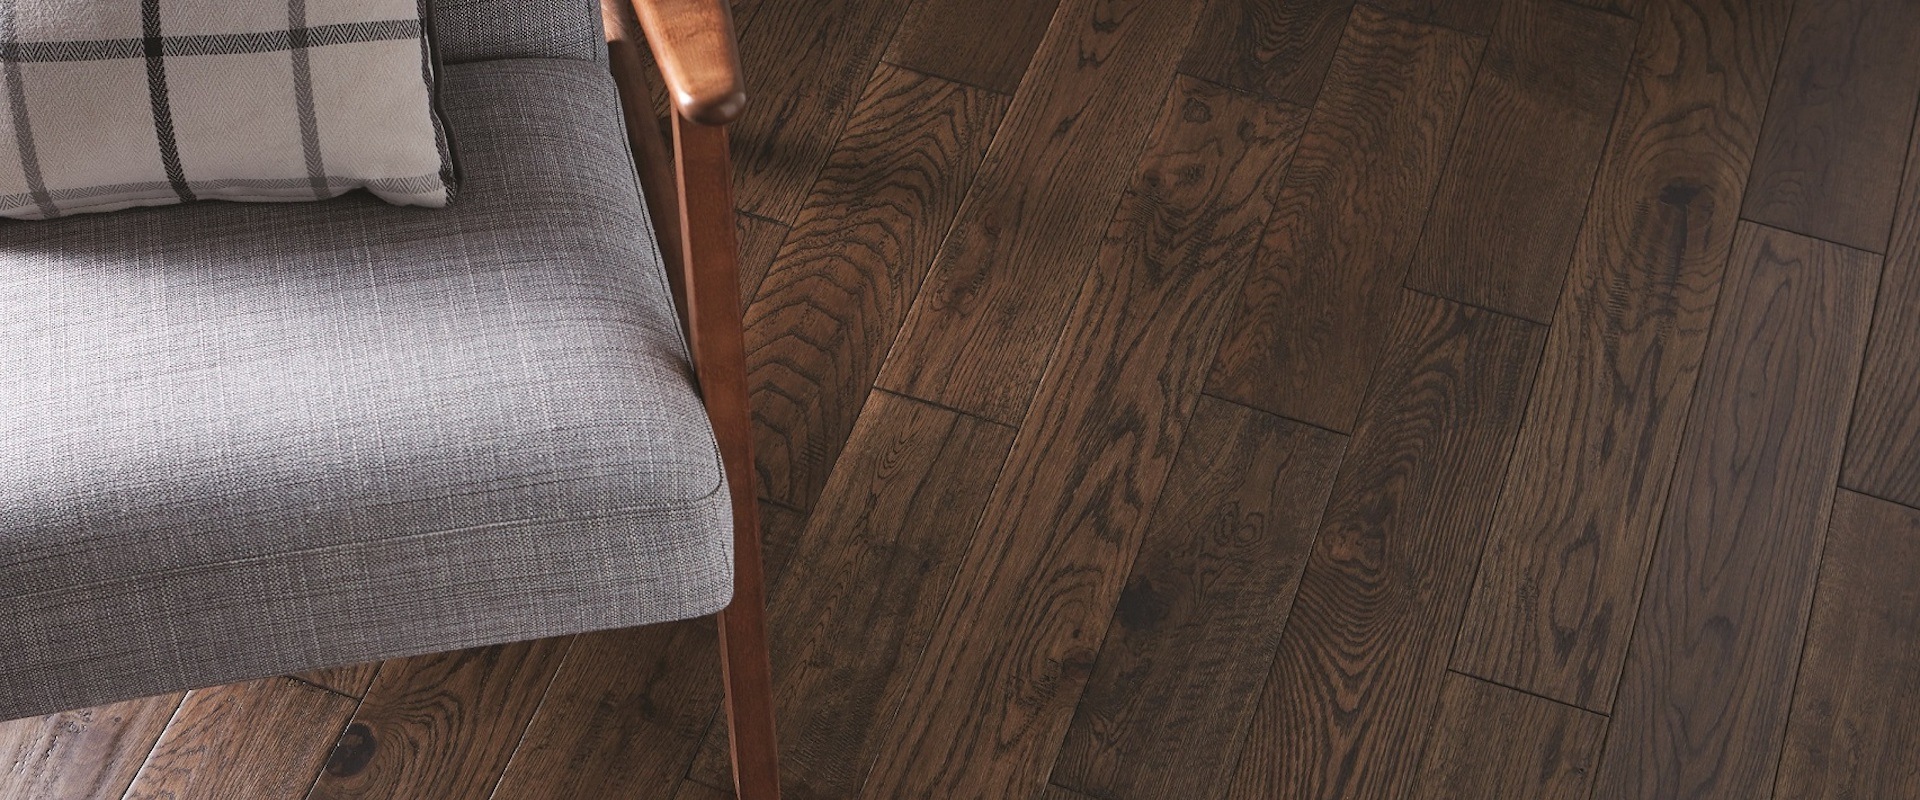 Non-toxic Wood Floor Polish: The Safe and Effective Solution for Your Hardwood or Laminate Floors